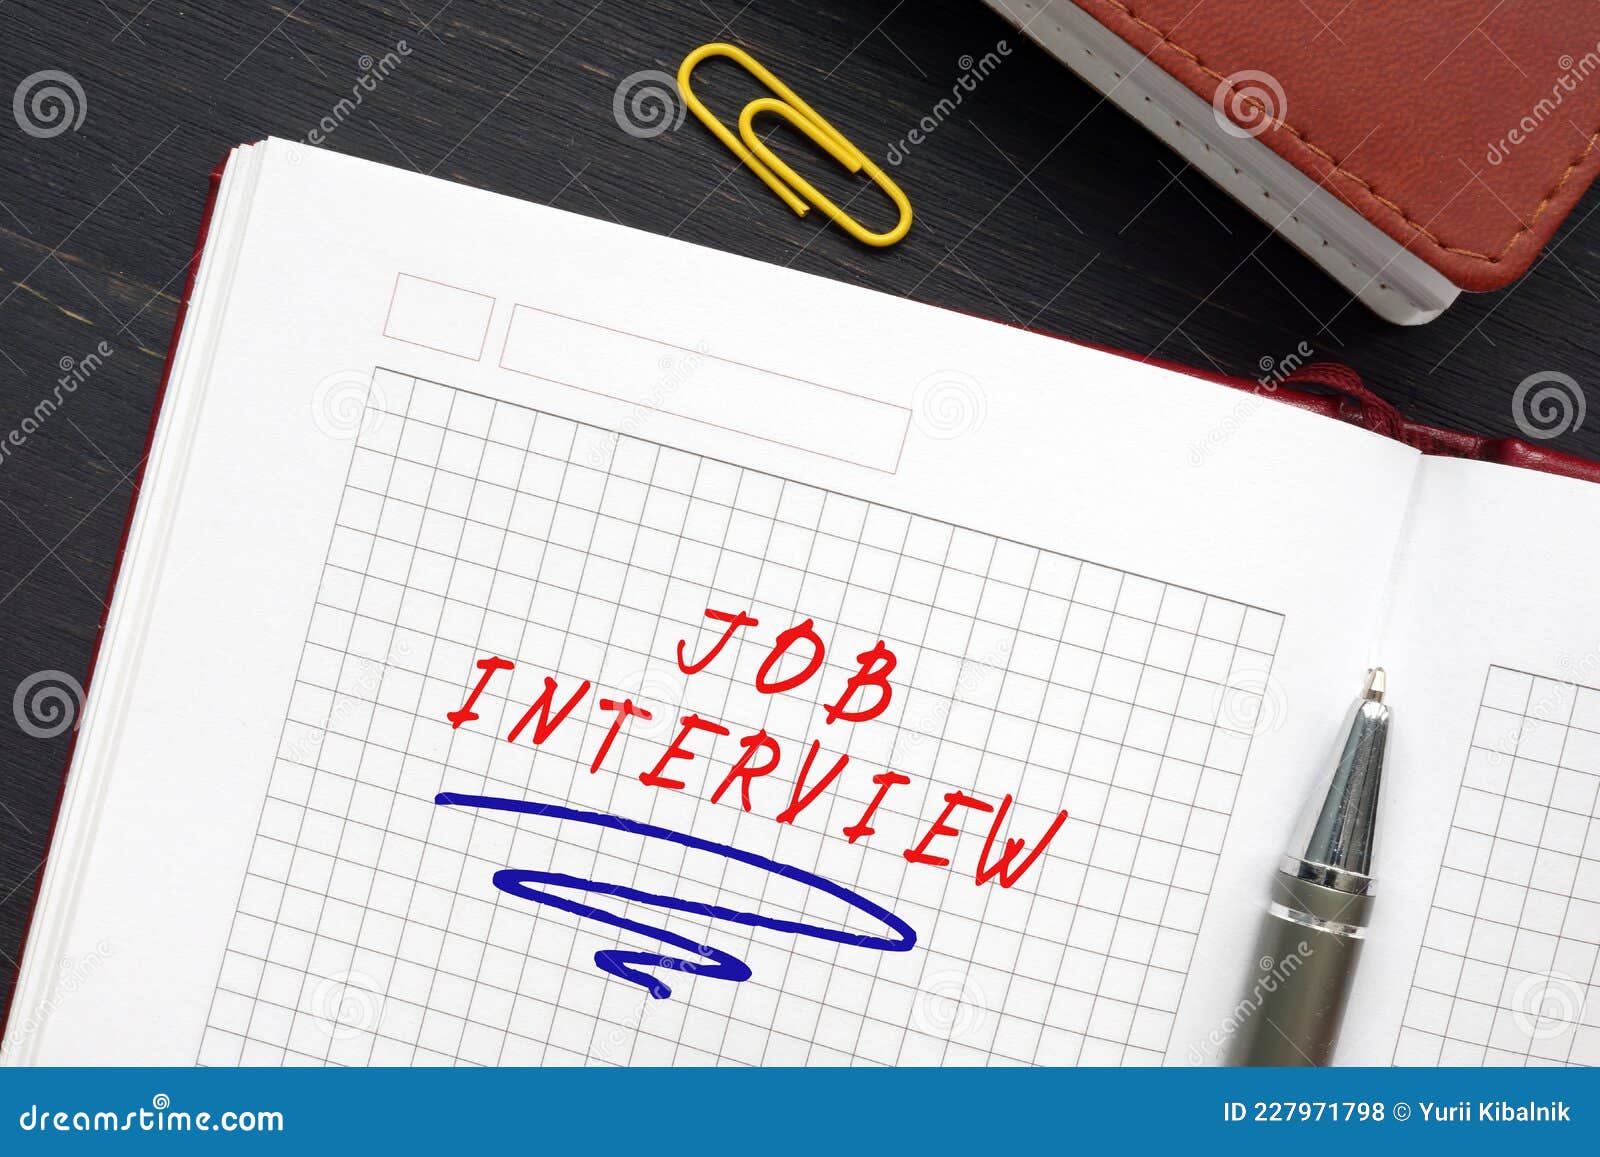 business concept meaning job interview with phrase on the page. aÃÂ job interviewÃÂ is anÃÂ interviewÃÂ consisting of a conversation